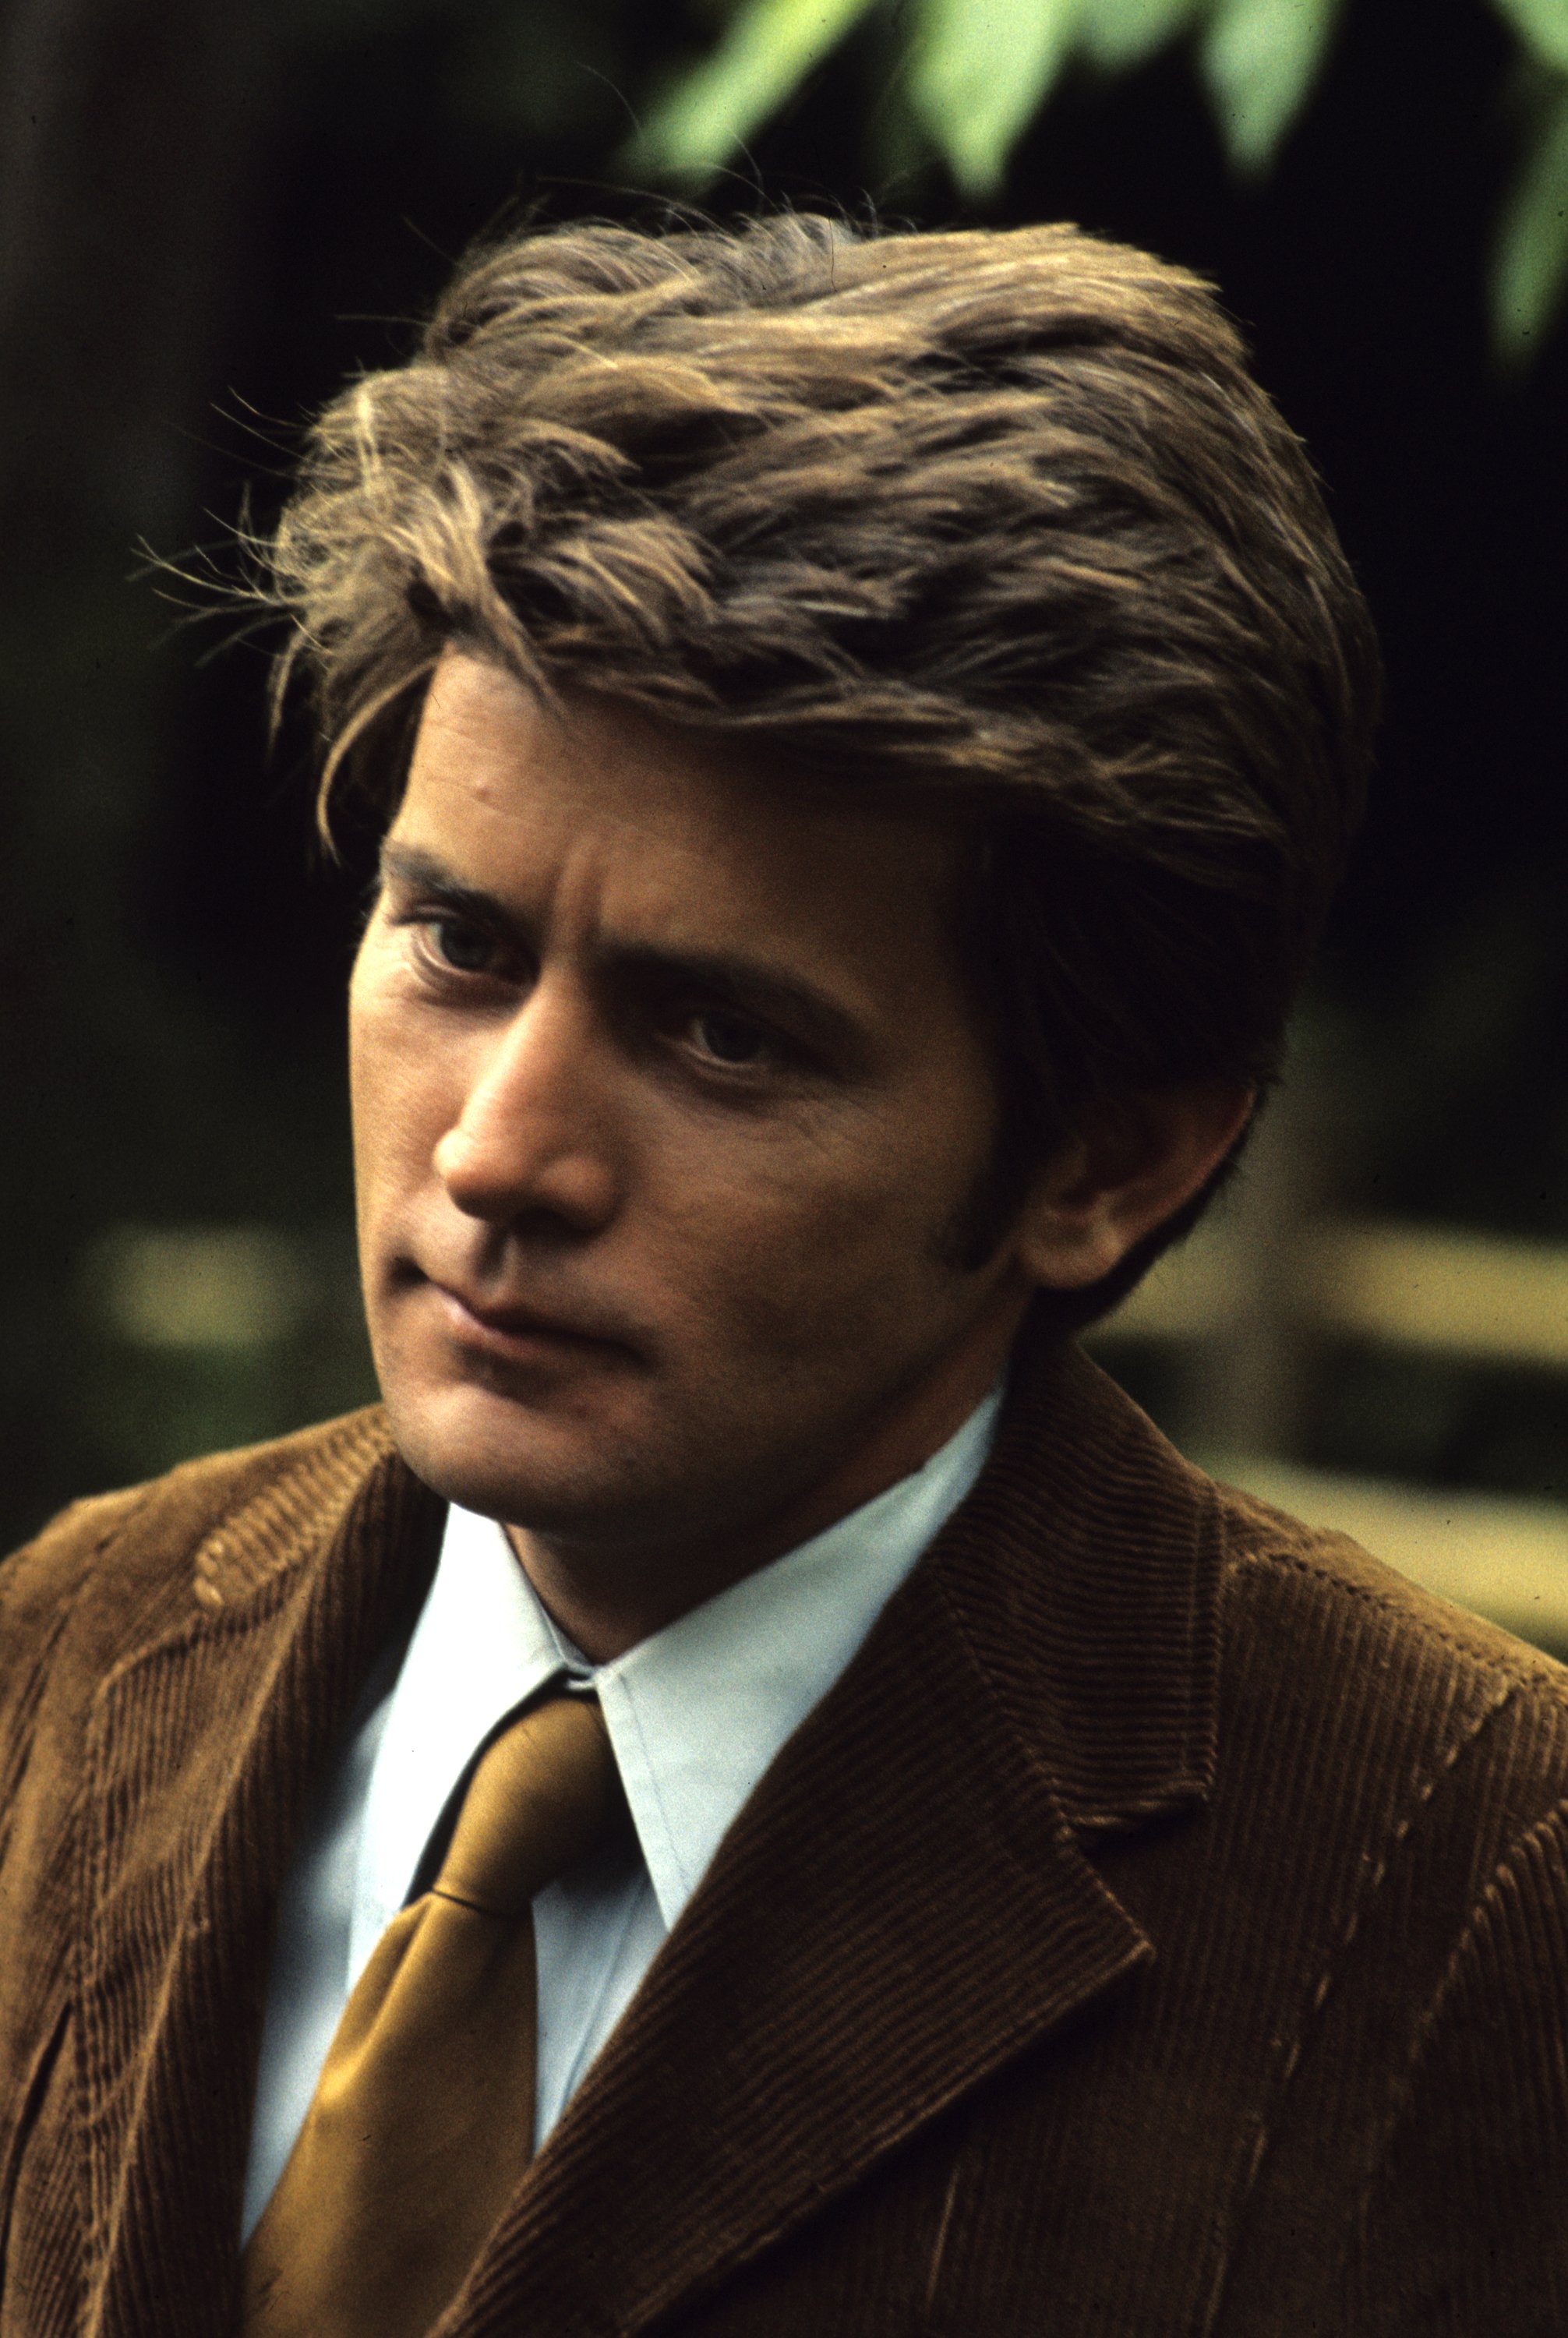 Martin Sheen as Gary McClain in the movie "That Certain Summer" on November 1, 1972. / Source: Getty Images